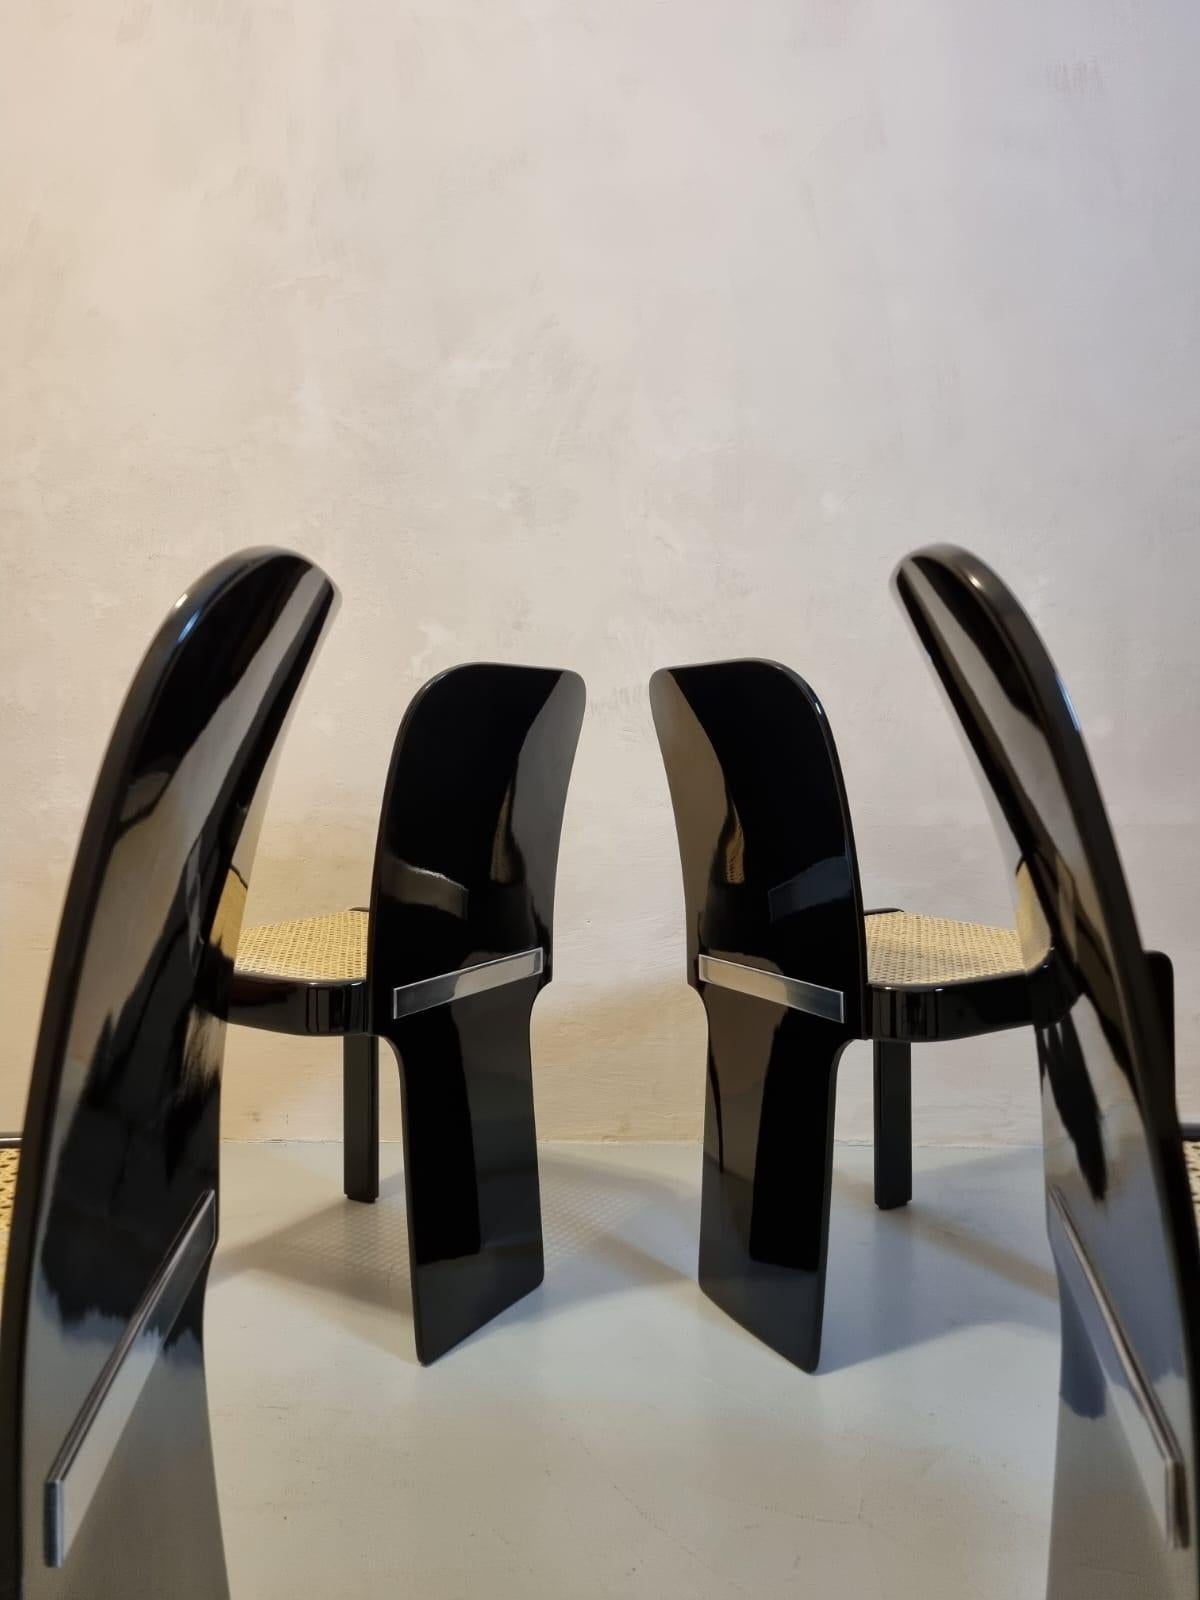 Chairs by Pierluigi Molinari for Pozzi 1970, black lacquered wood and restored seats.